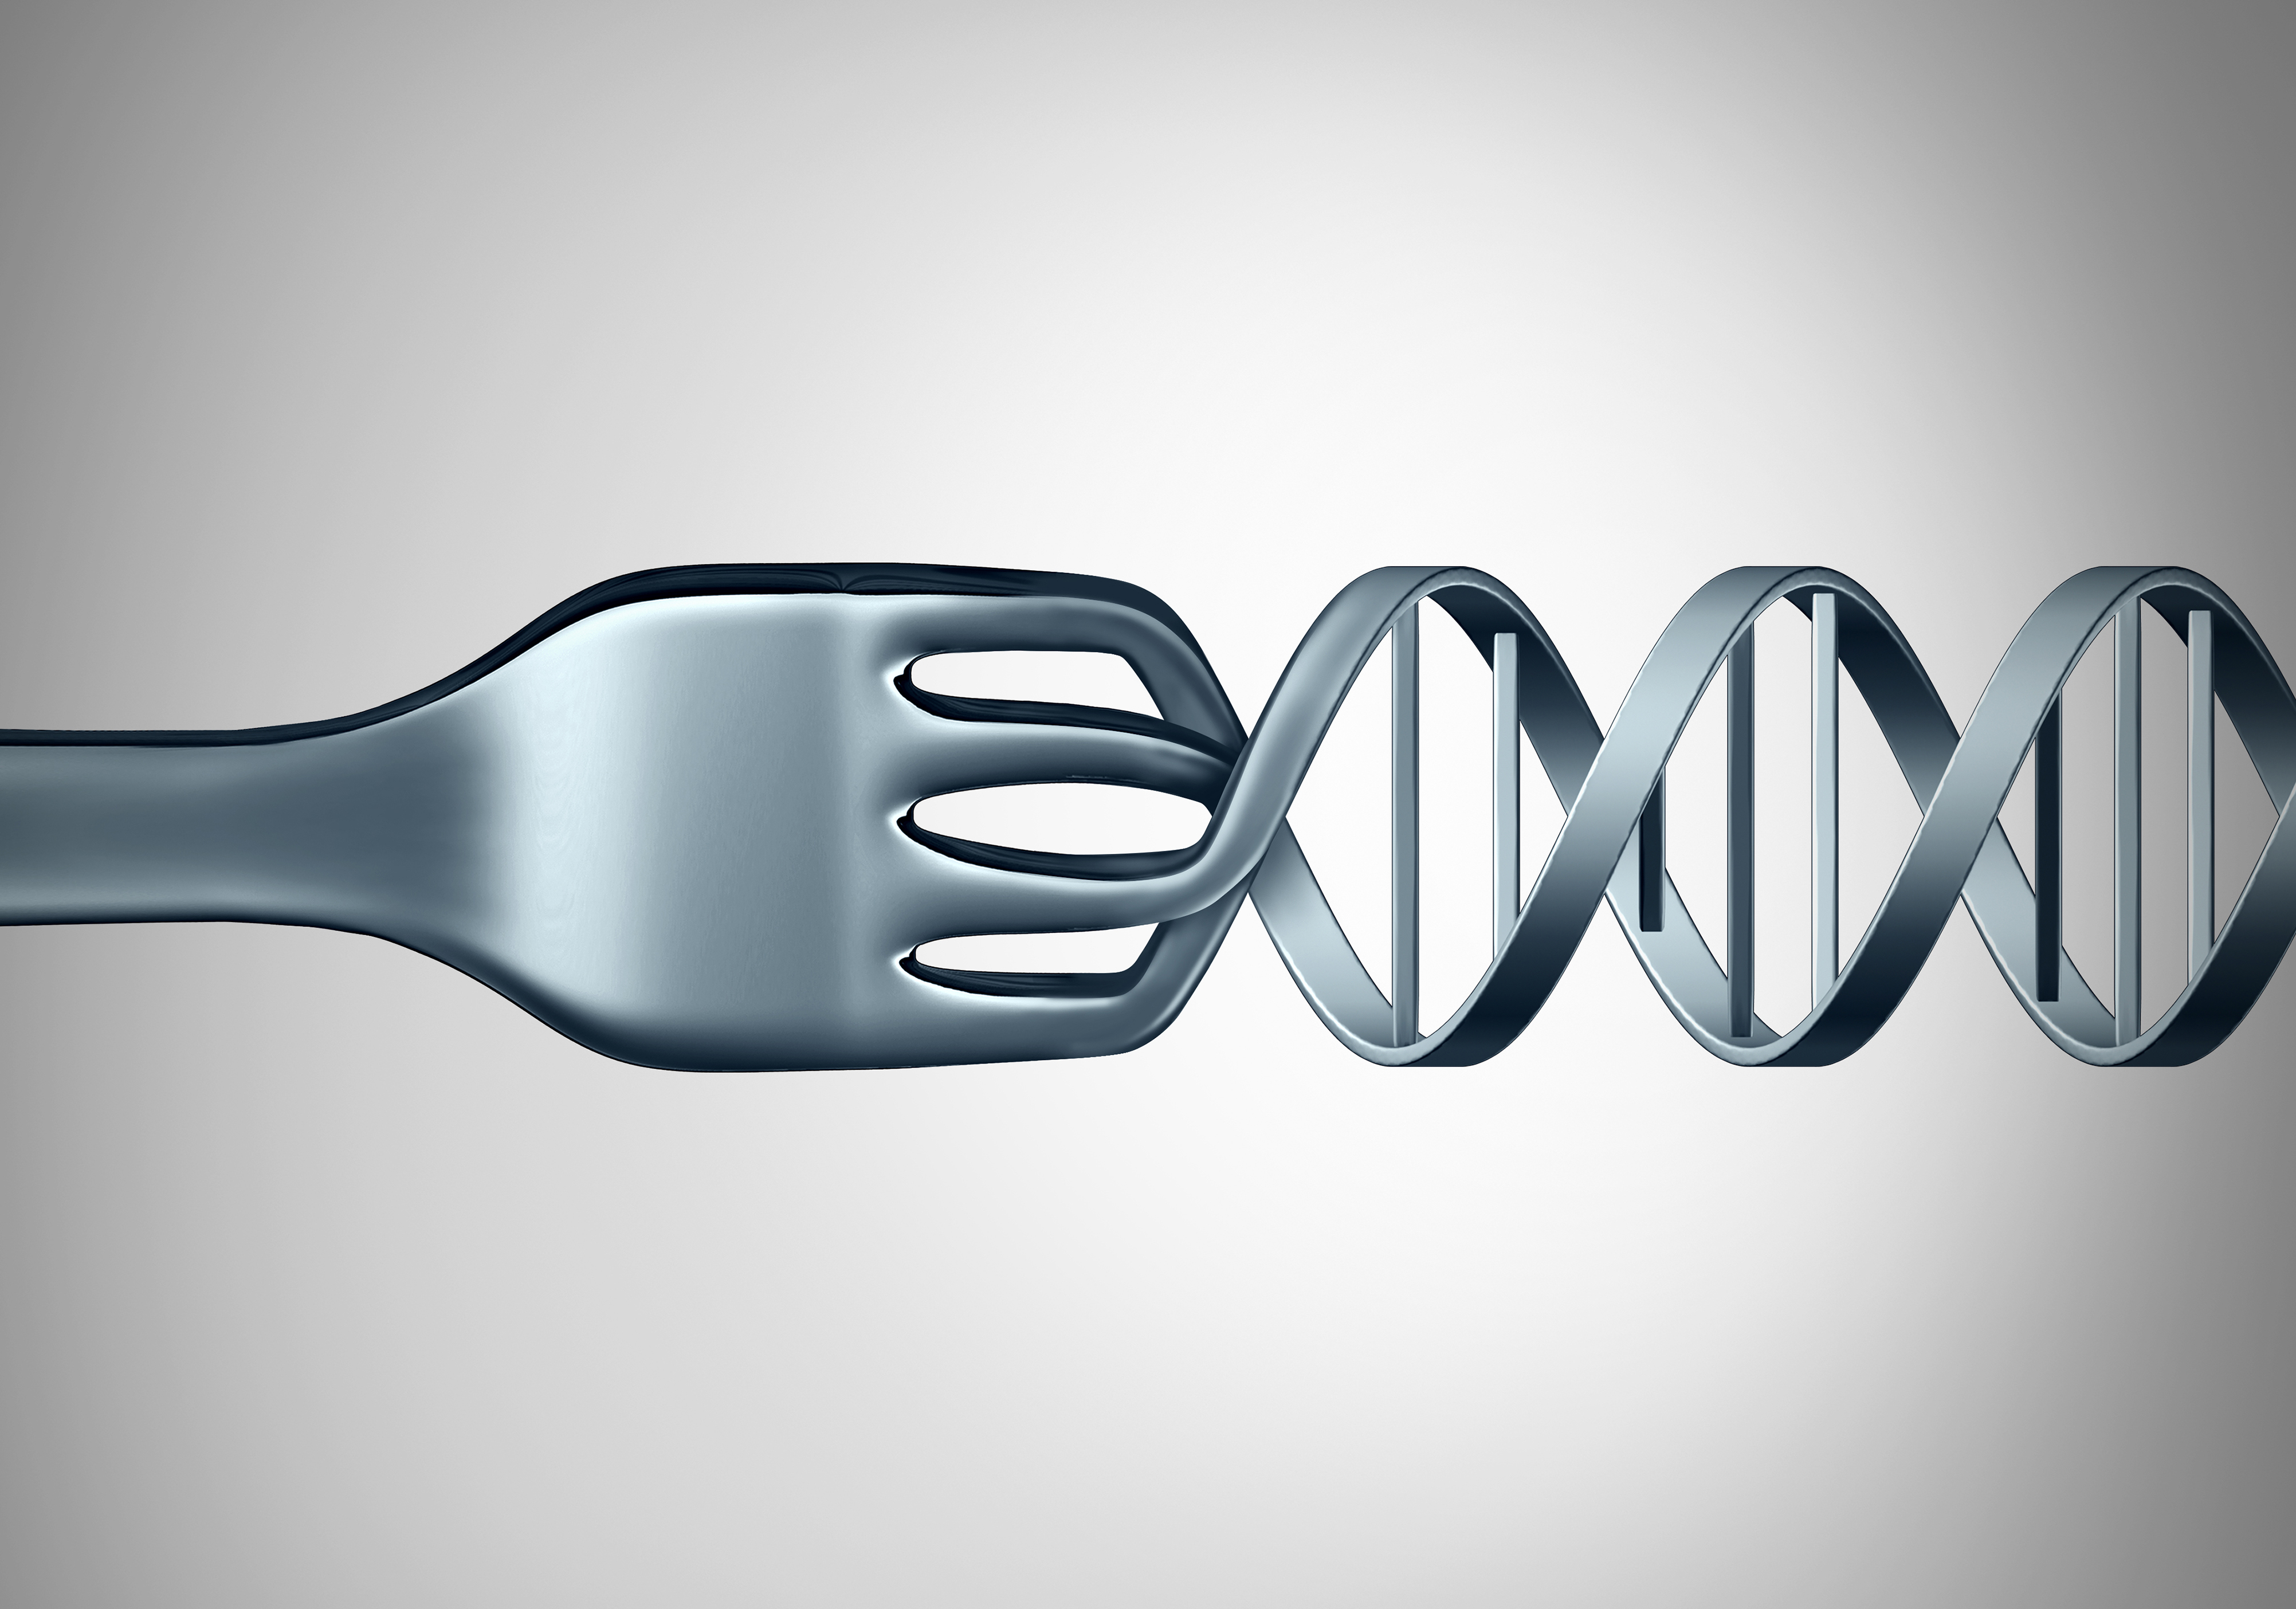 Researchers found that variations in certain genes play a significant role in a person's food choices and dietary habits. For example, higher chocolate intake and a larger waist size was associated with certain forms of the oxytocin receptor gene, and an obesity-associated gene played a role in vegetable and fiber intake. Other genes were involved in salt and fat intake. [wildpixelGetty Images]